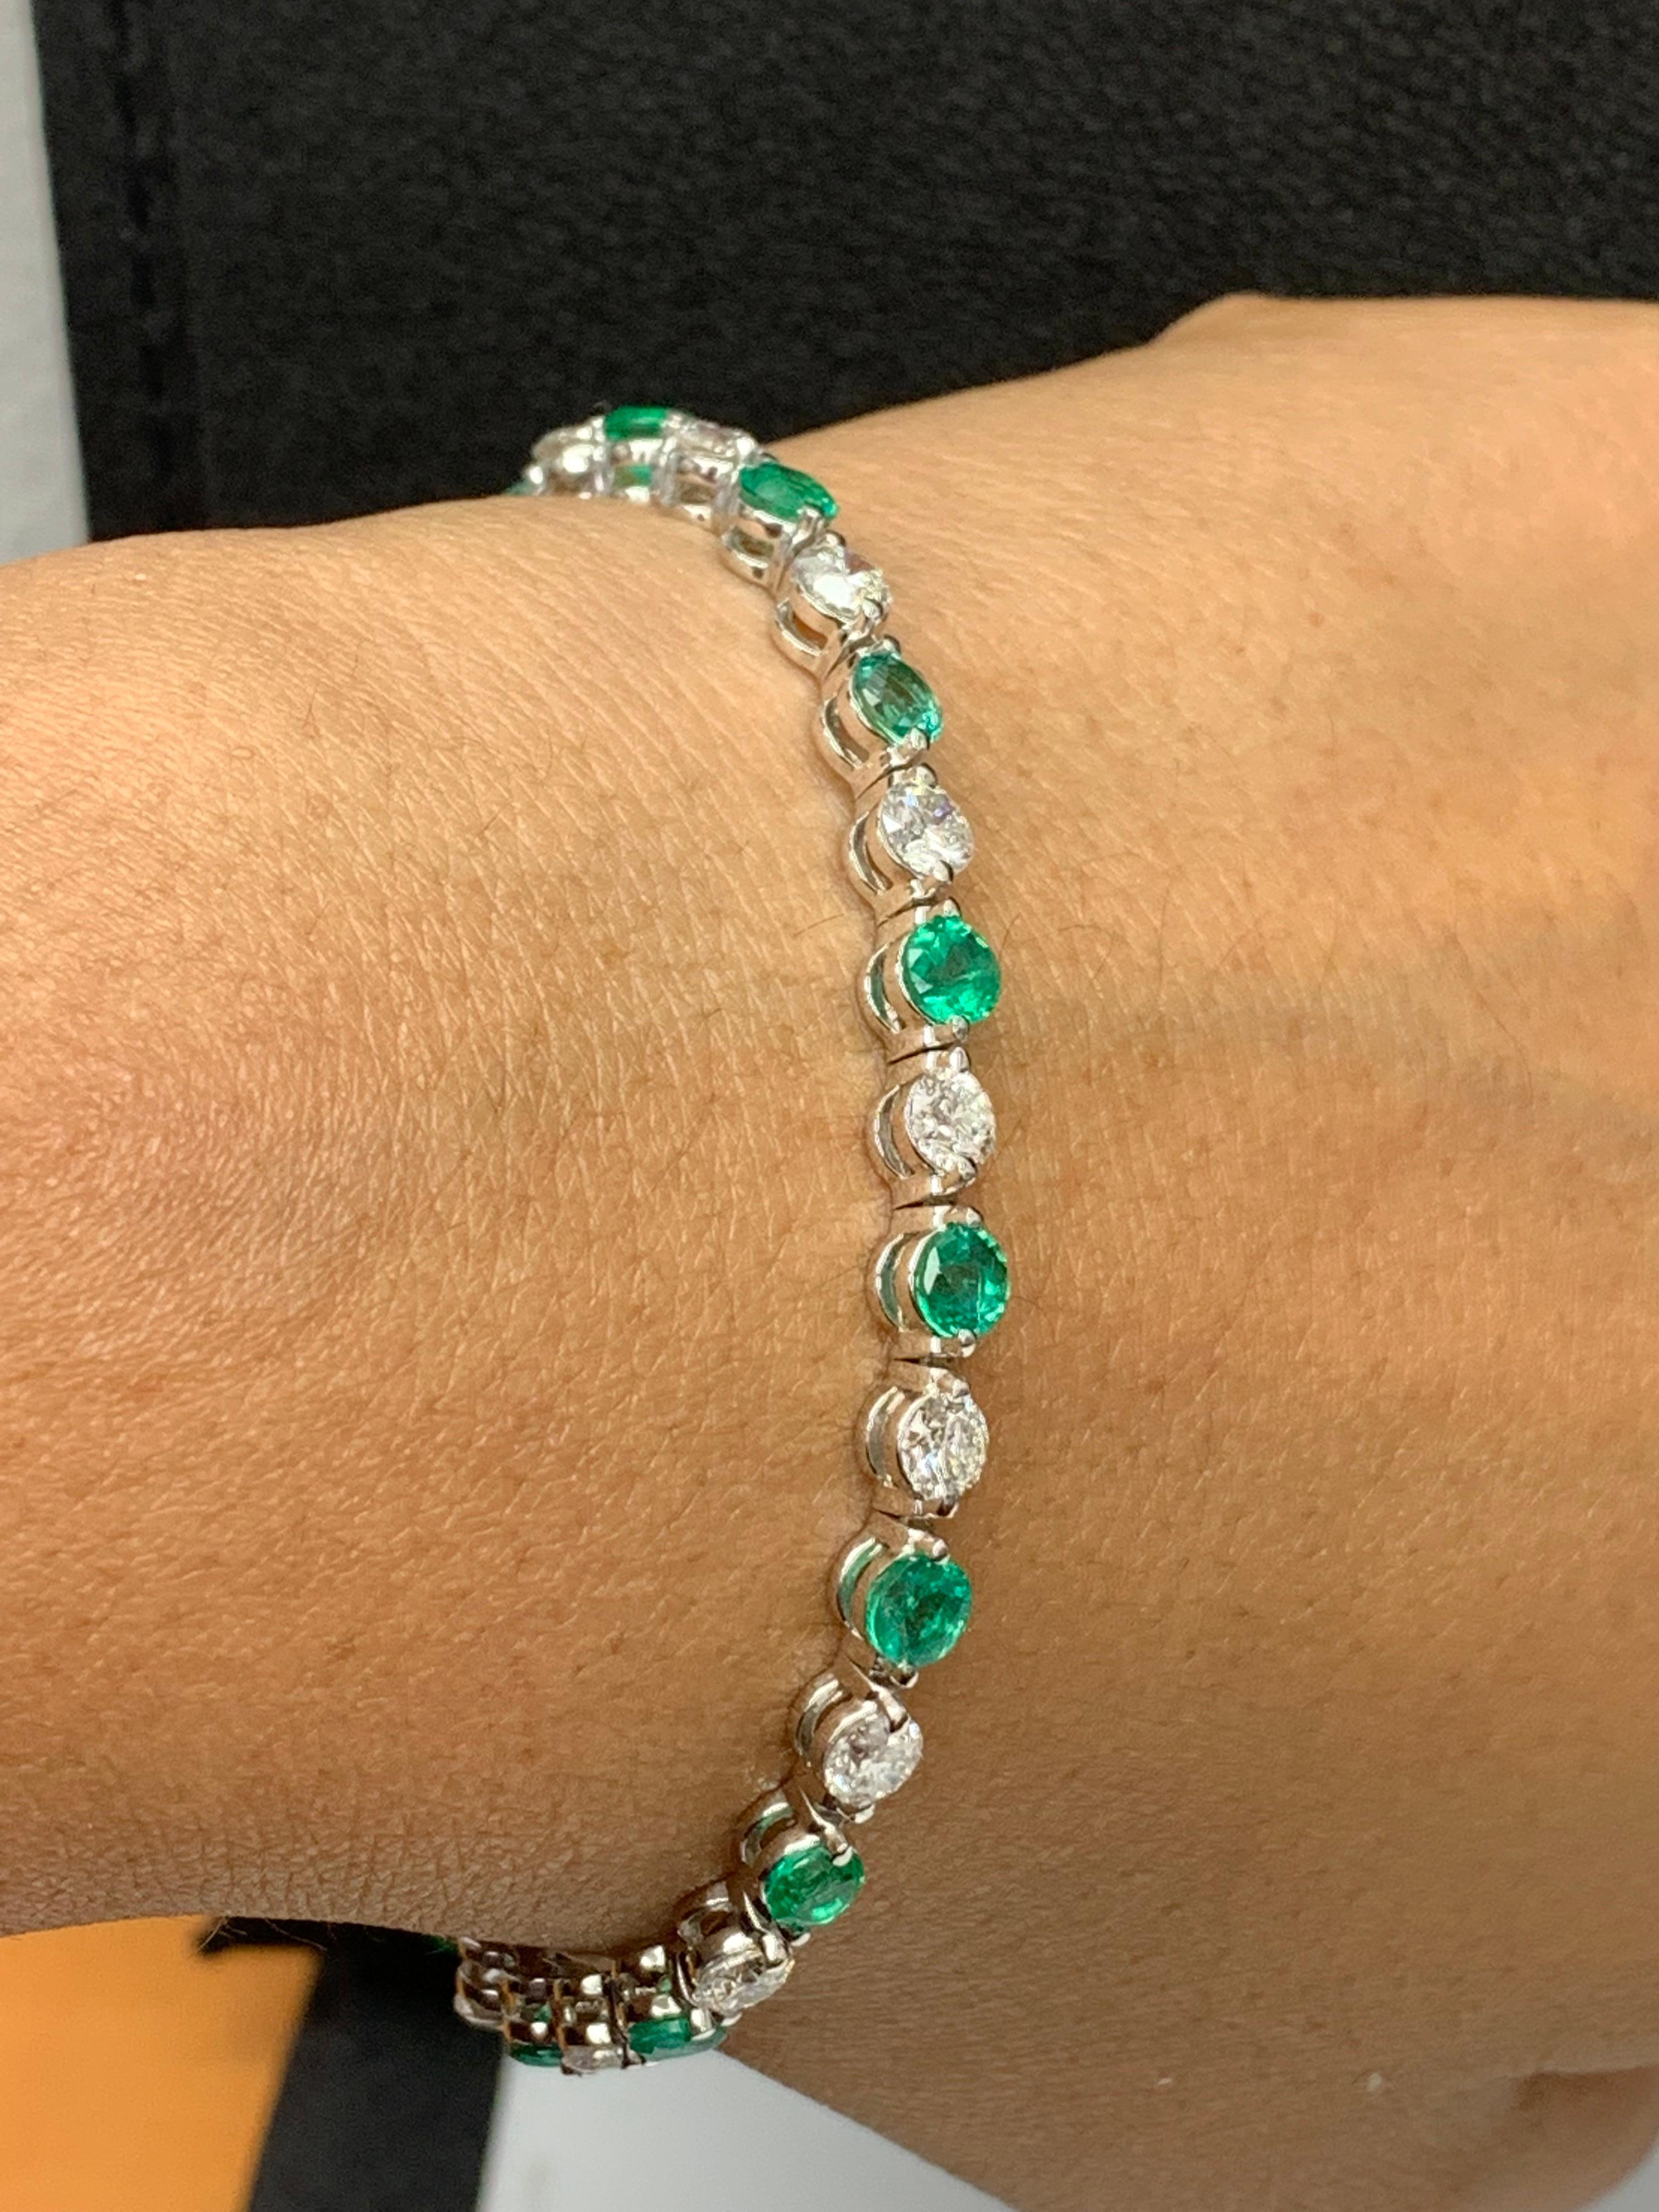 4.07 Carat Round Emerald and Diamond Bracelet in 14K White Gold For Sale 2